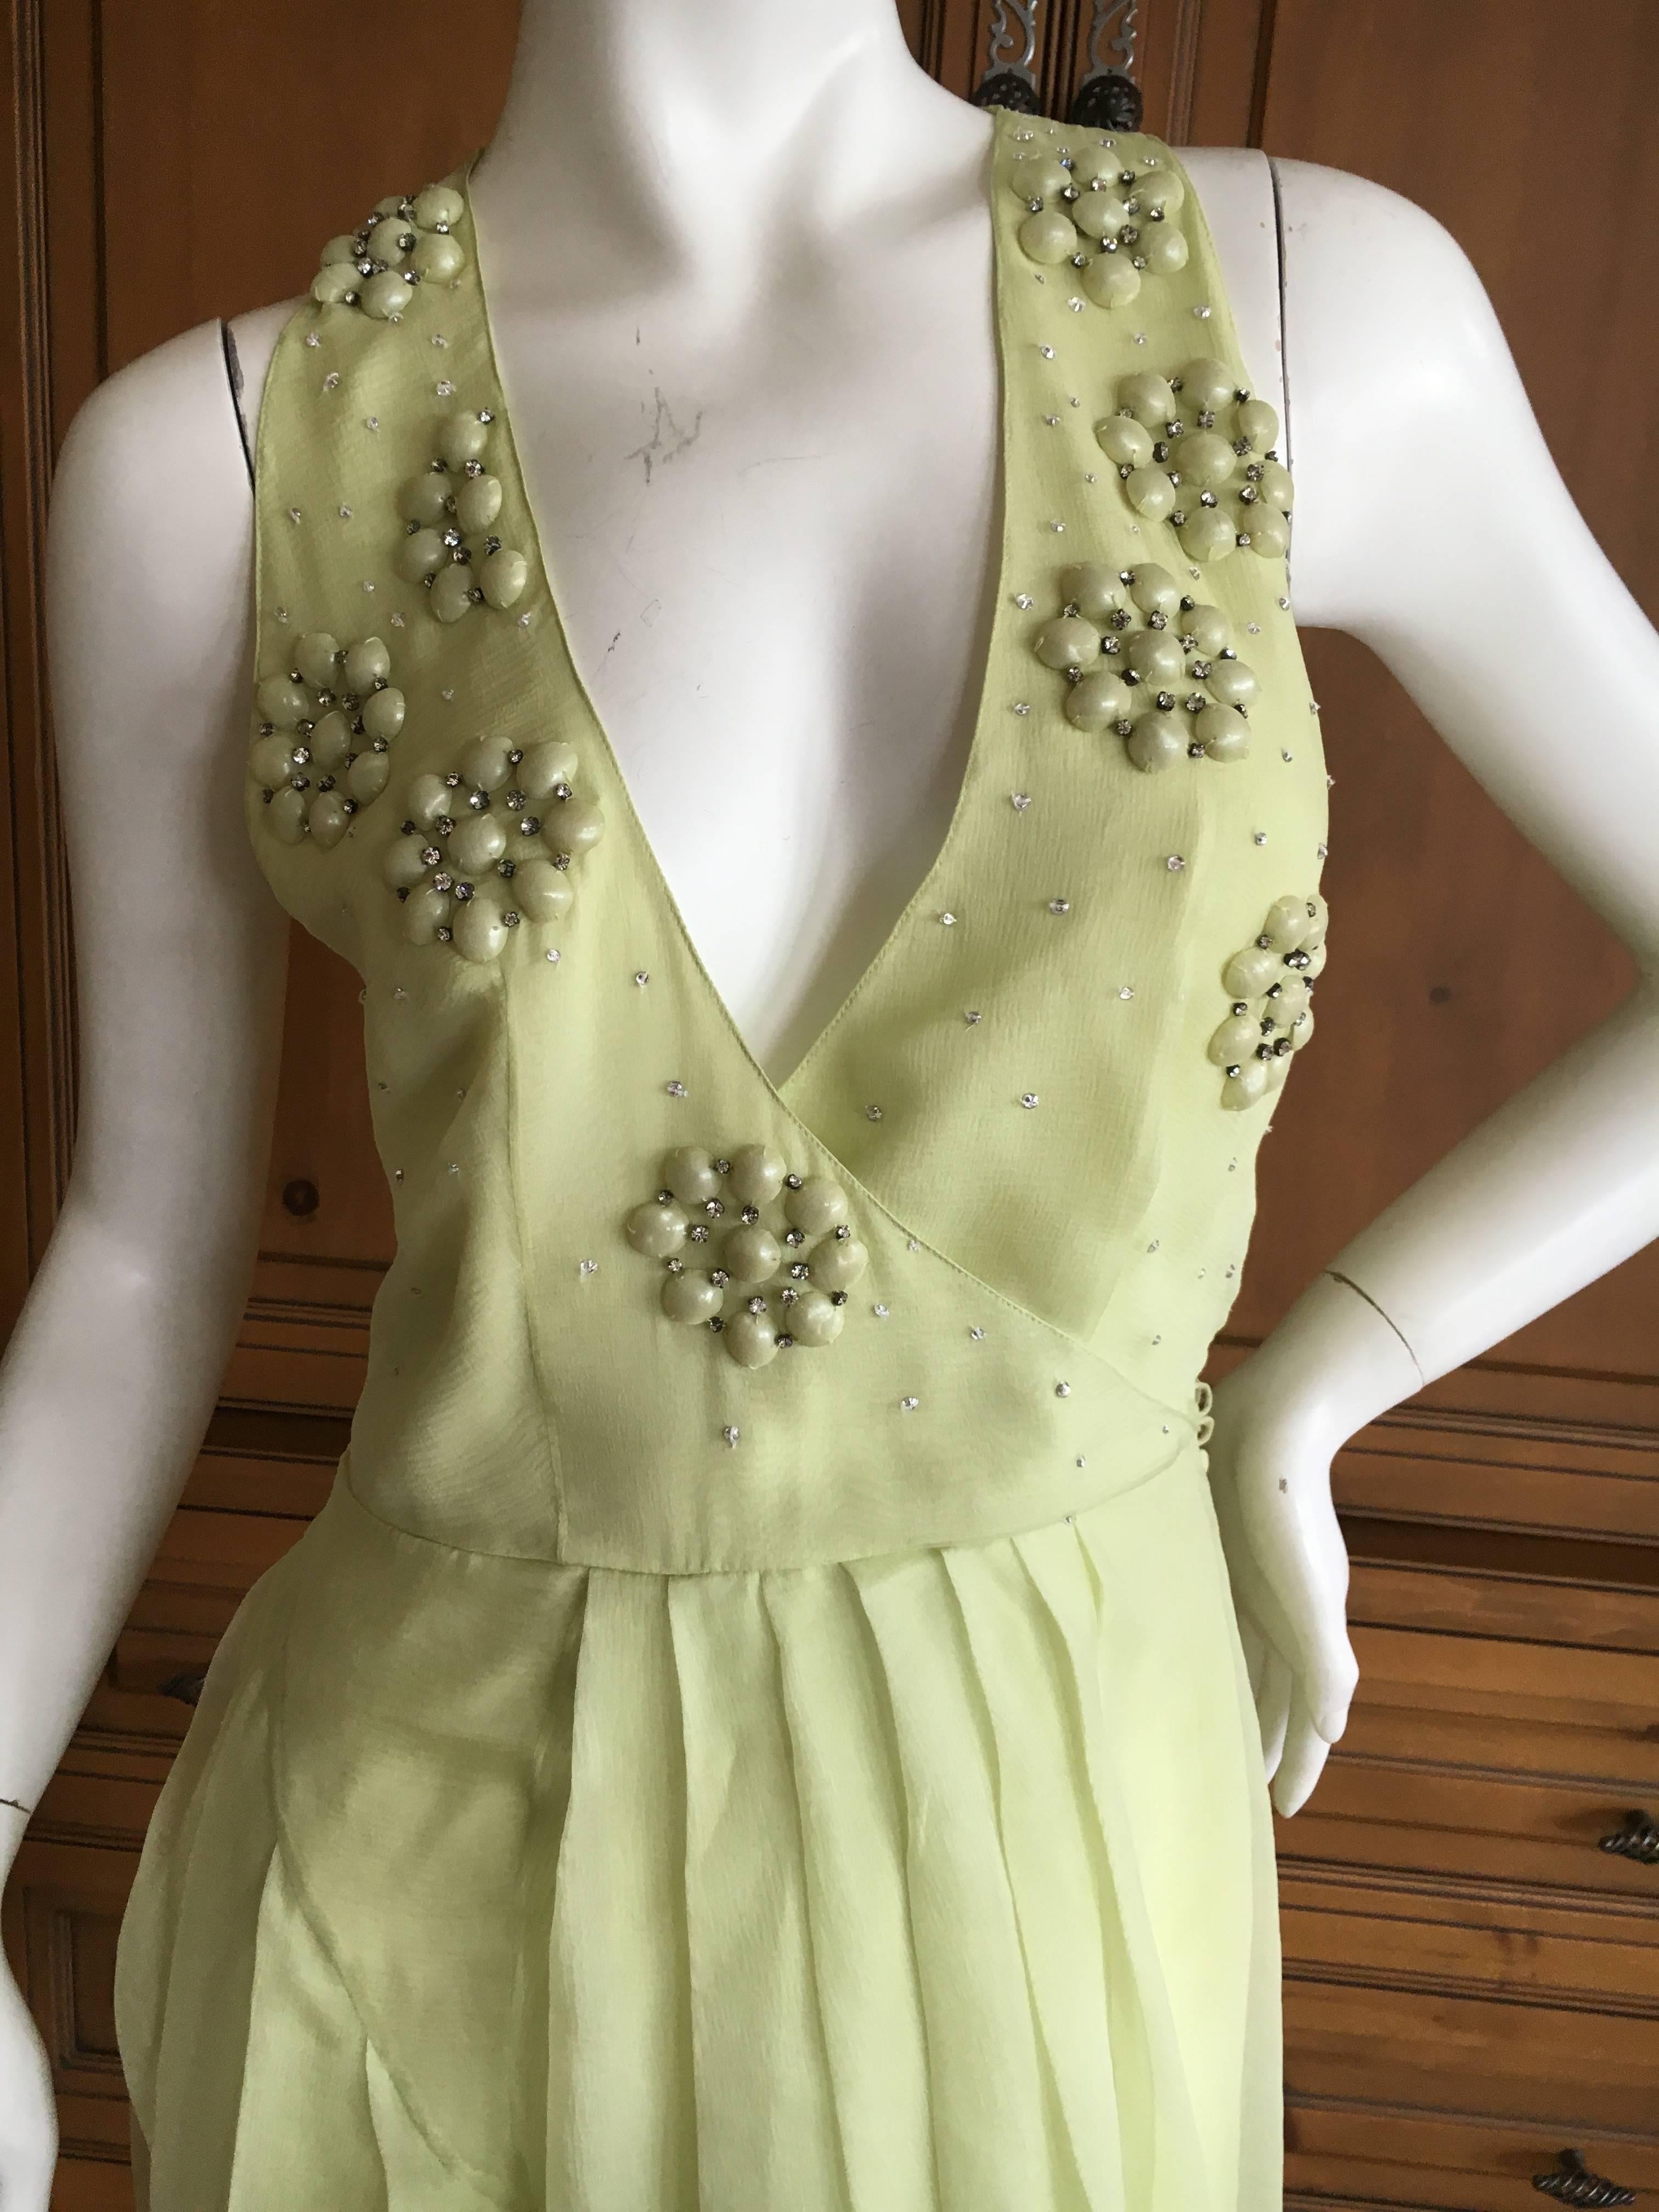 Christian Dior Green Silk Chiffon Dress  In Excellent Condition For Sale In Cloverdale, CA